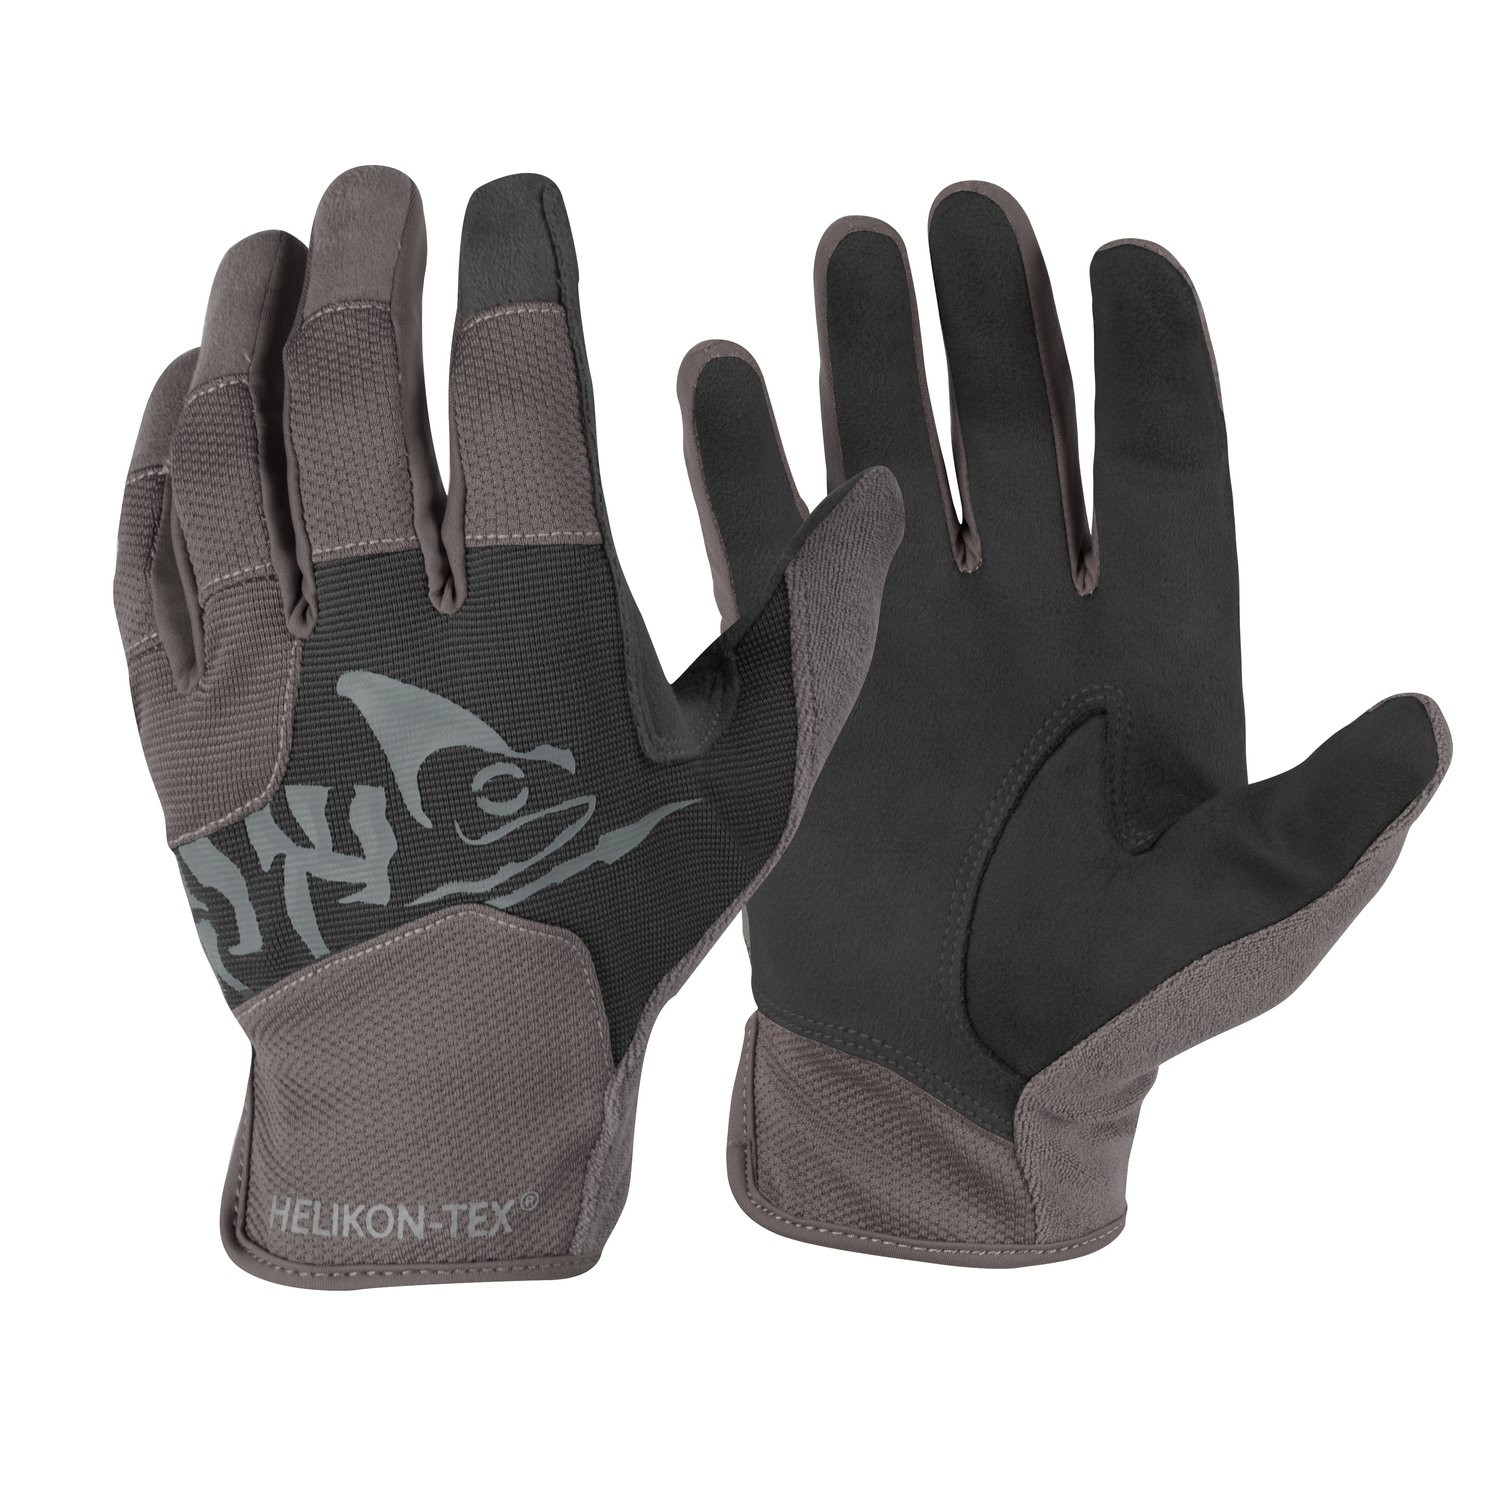 Helikon-Tex All Round Fit Tactical Gloves Handschuhe shooting coyote Adaptive A